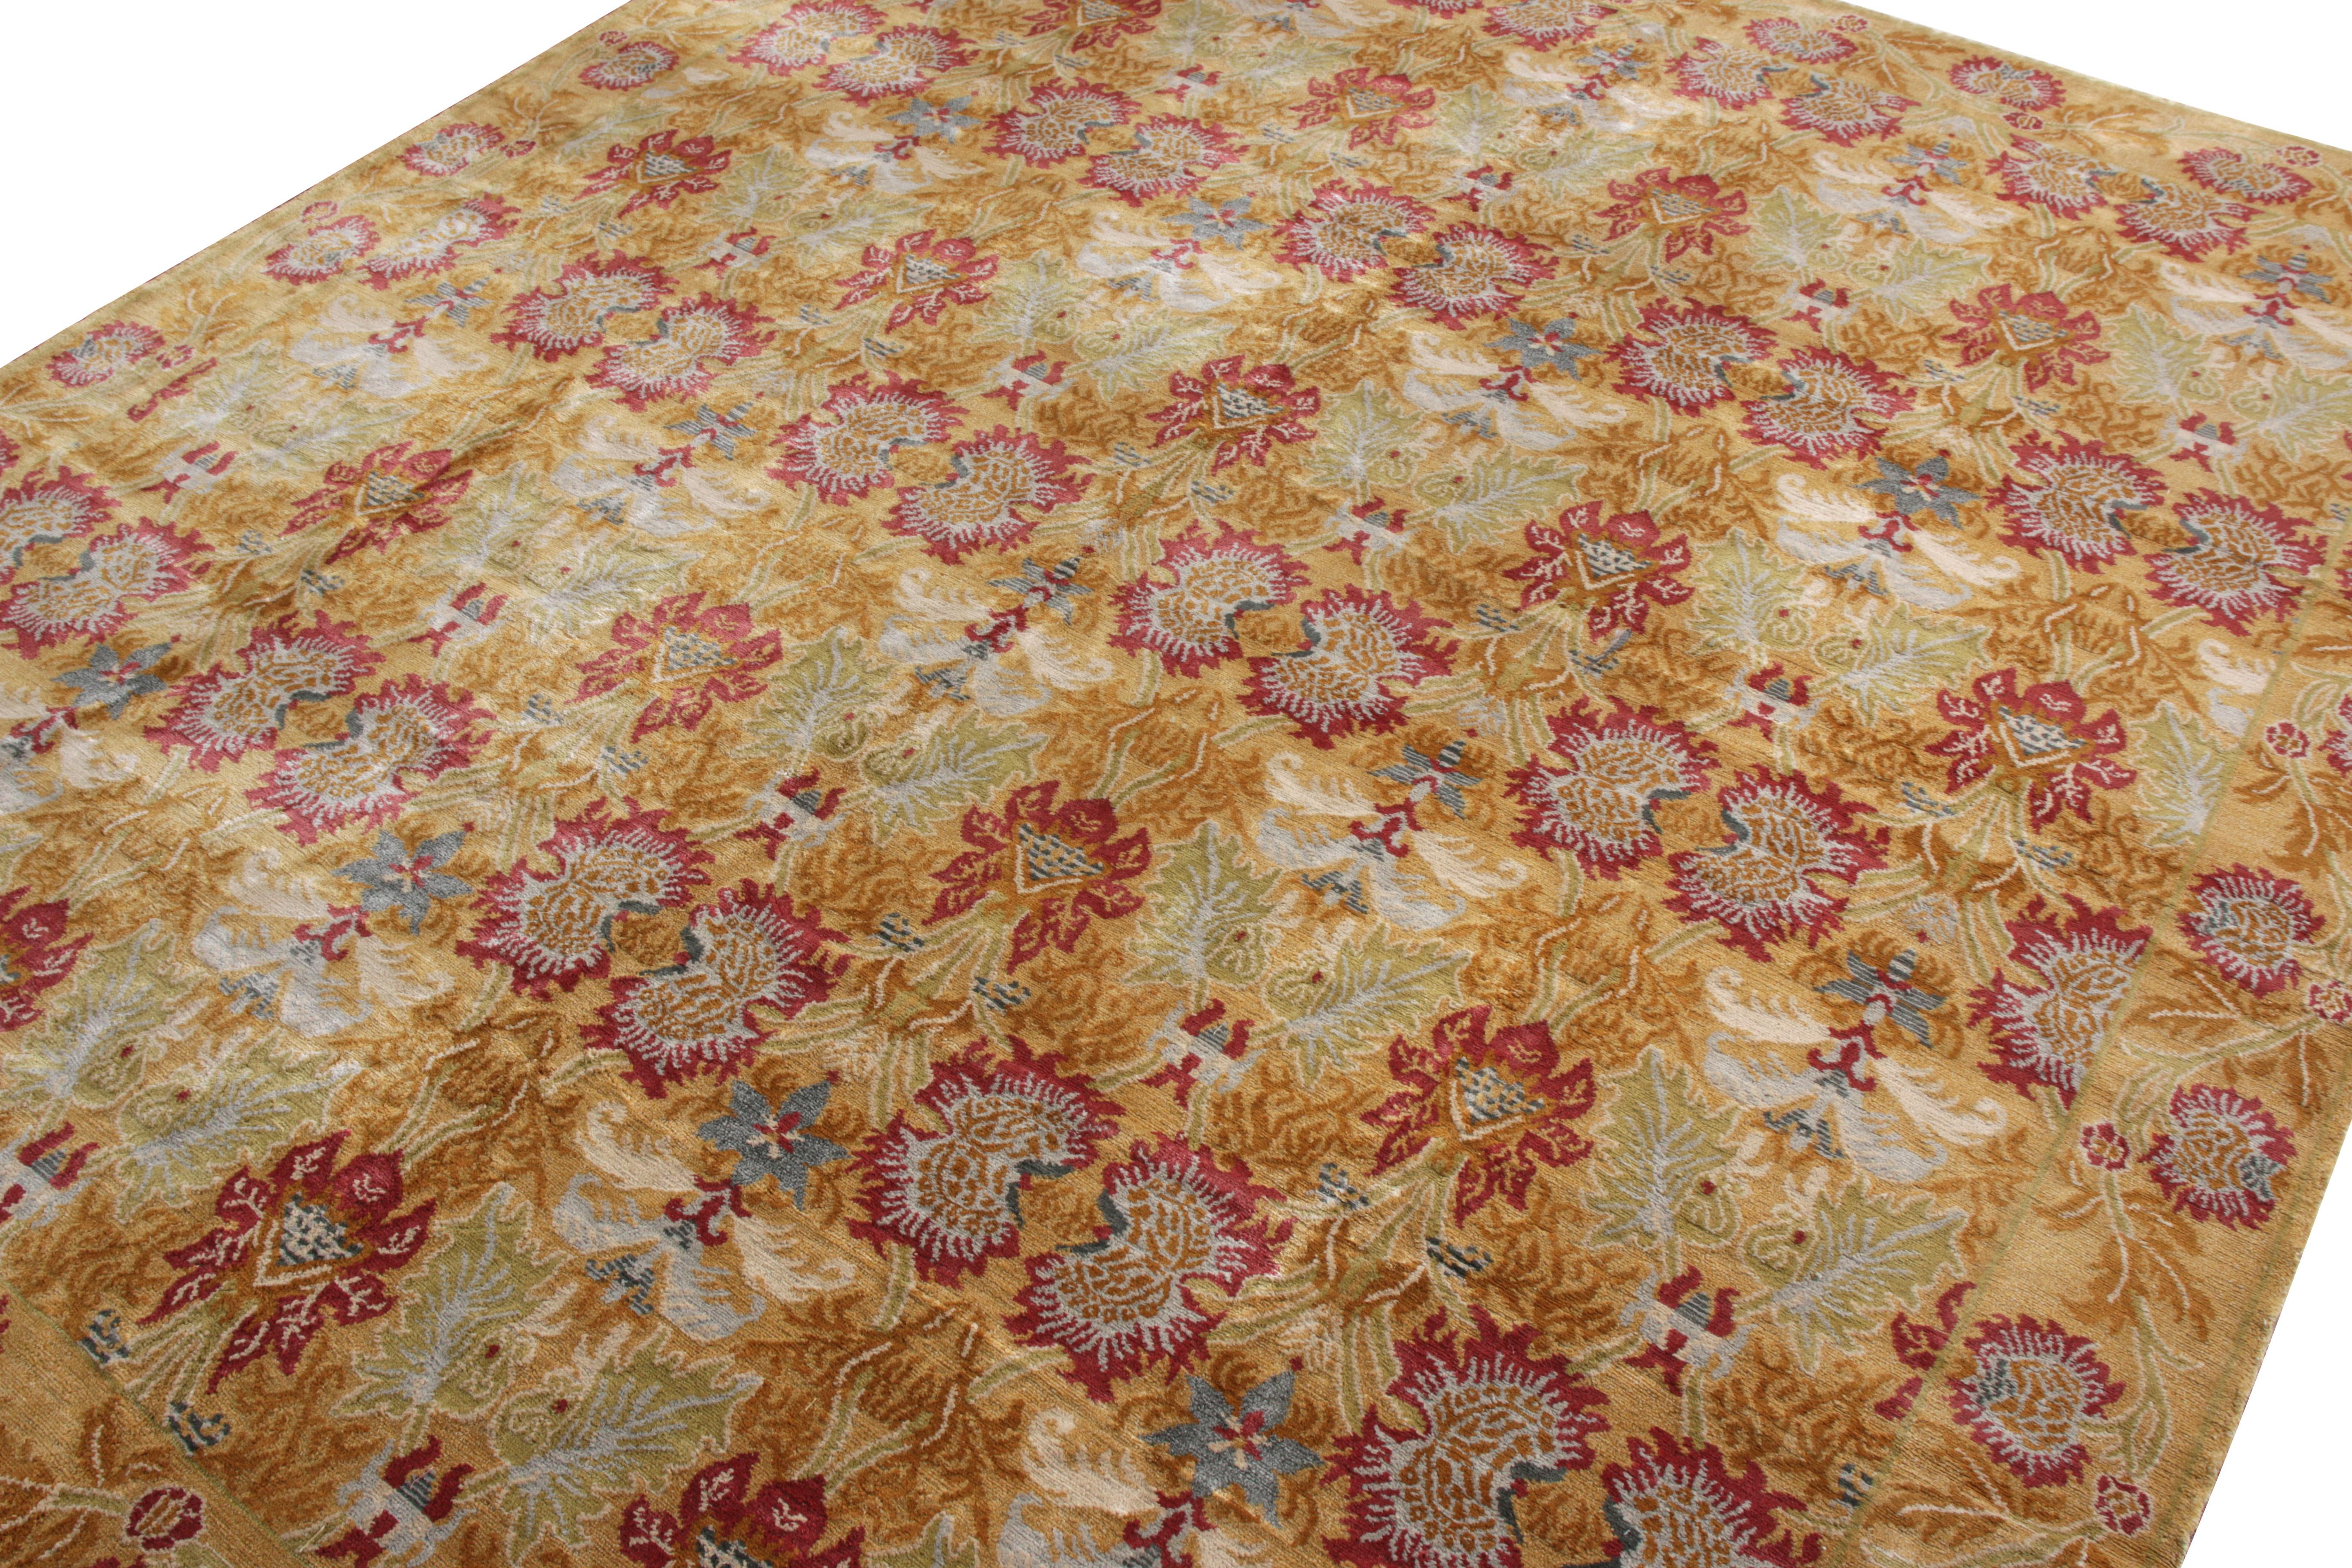 Spanish Rug & Kilim’s European Style Rug in Gold All Over Floral Pattern by Rug & Kilim For Sale